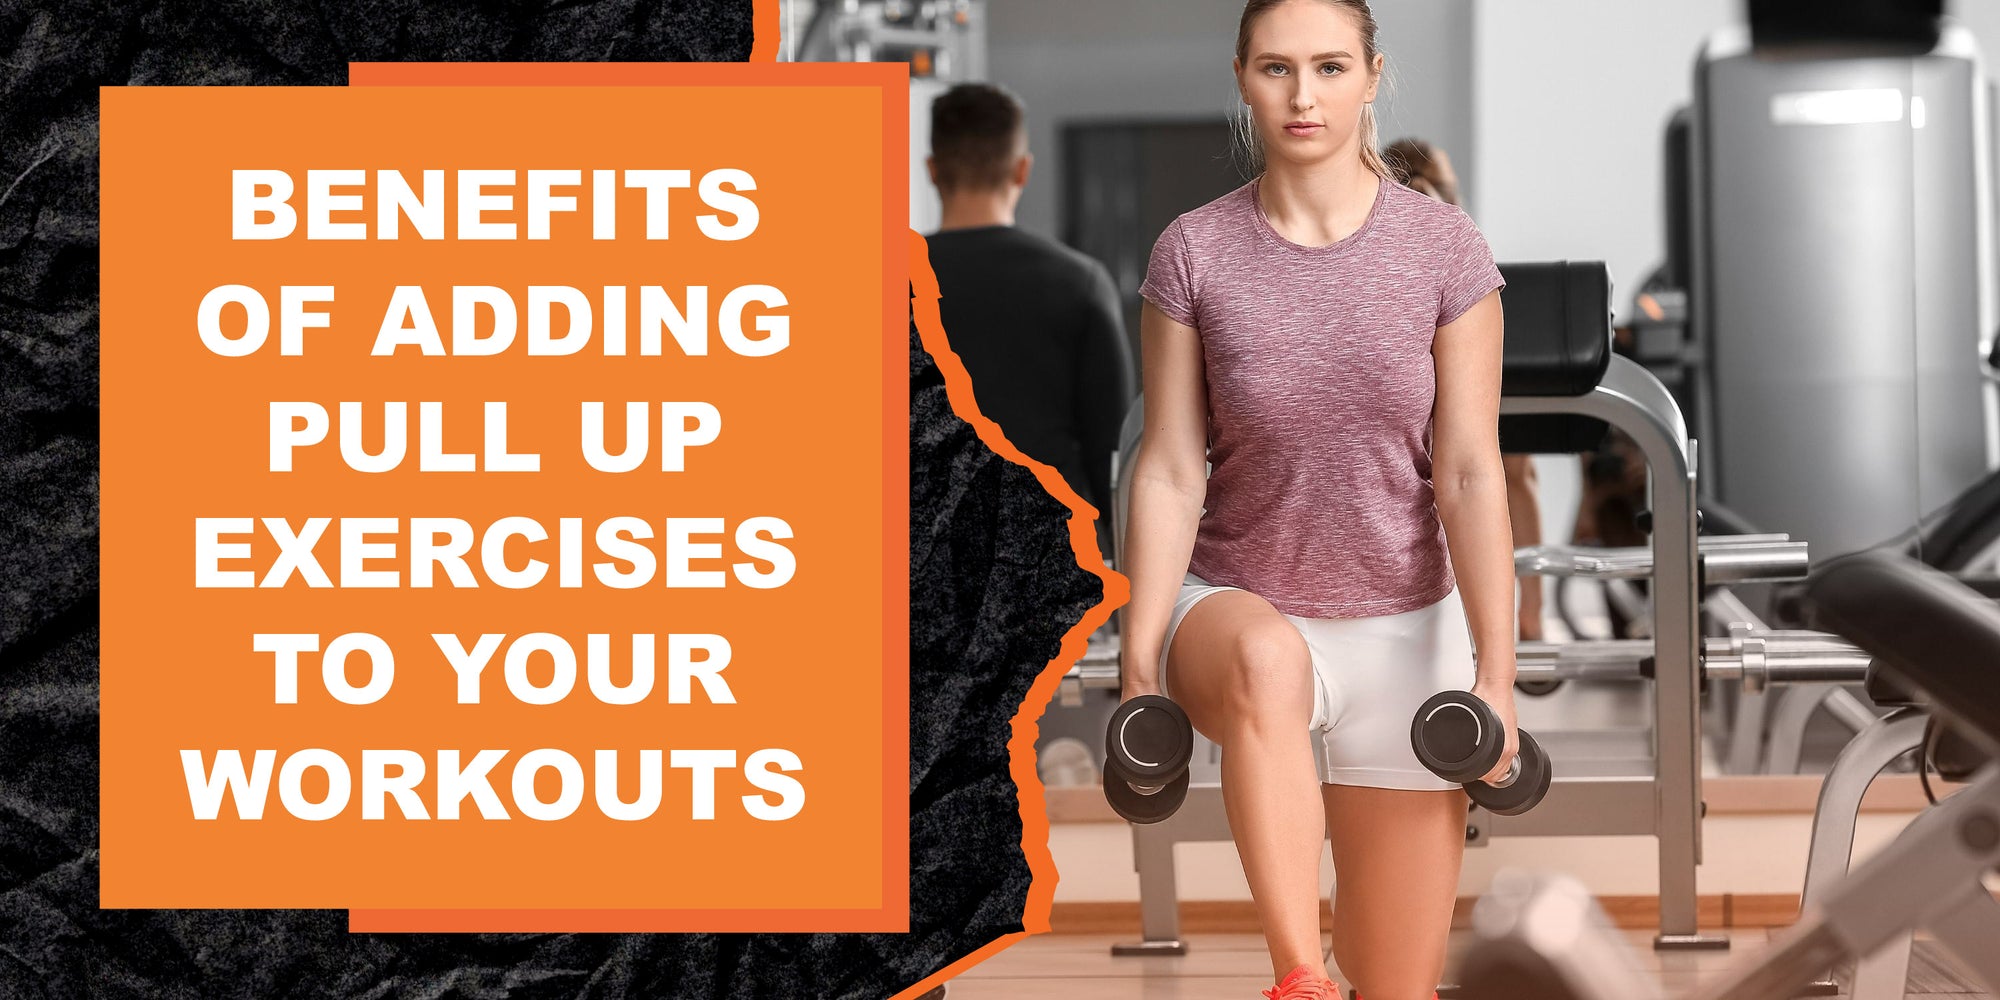 4 Benefits of Adding Pull Up Exercises to Your Workout Regimen